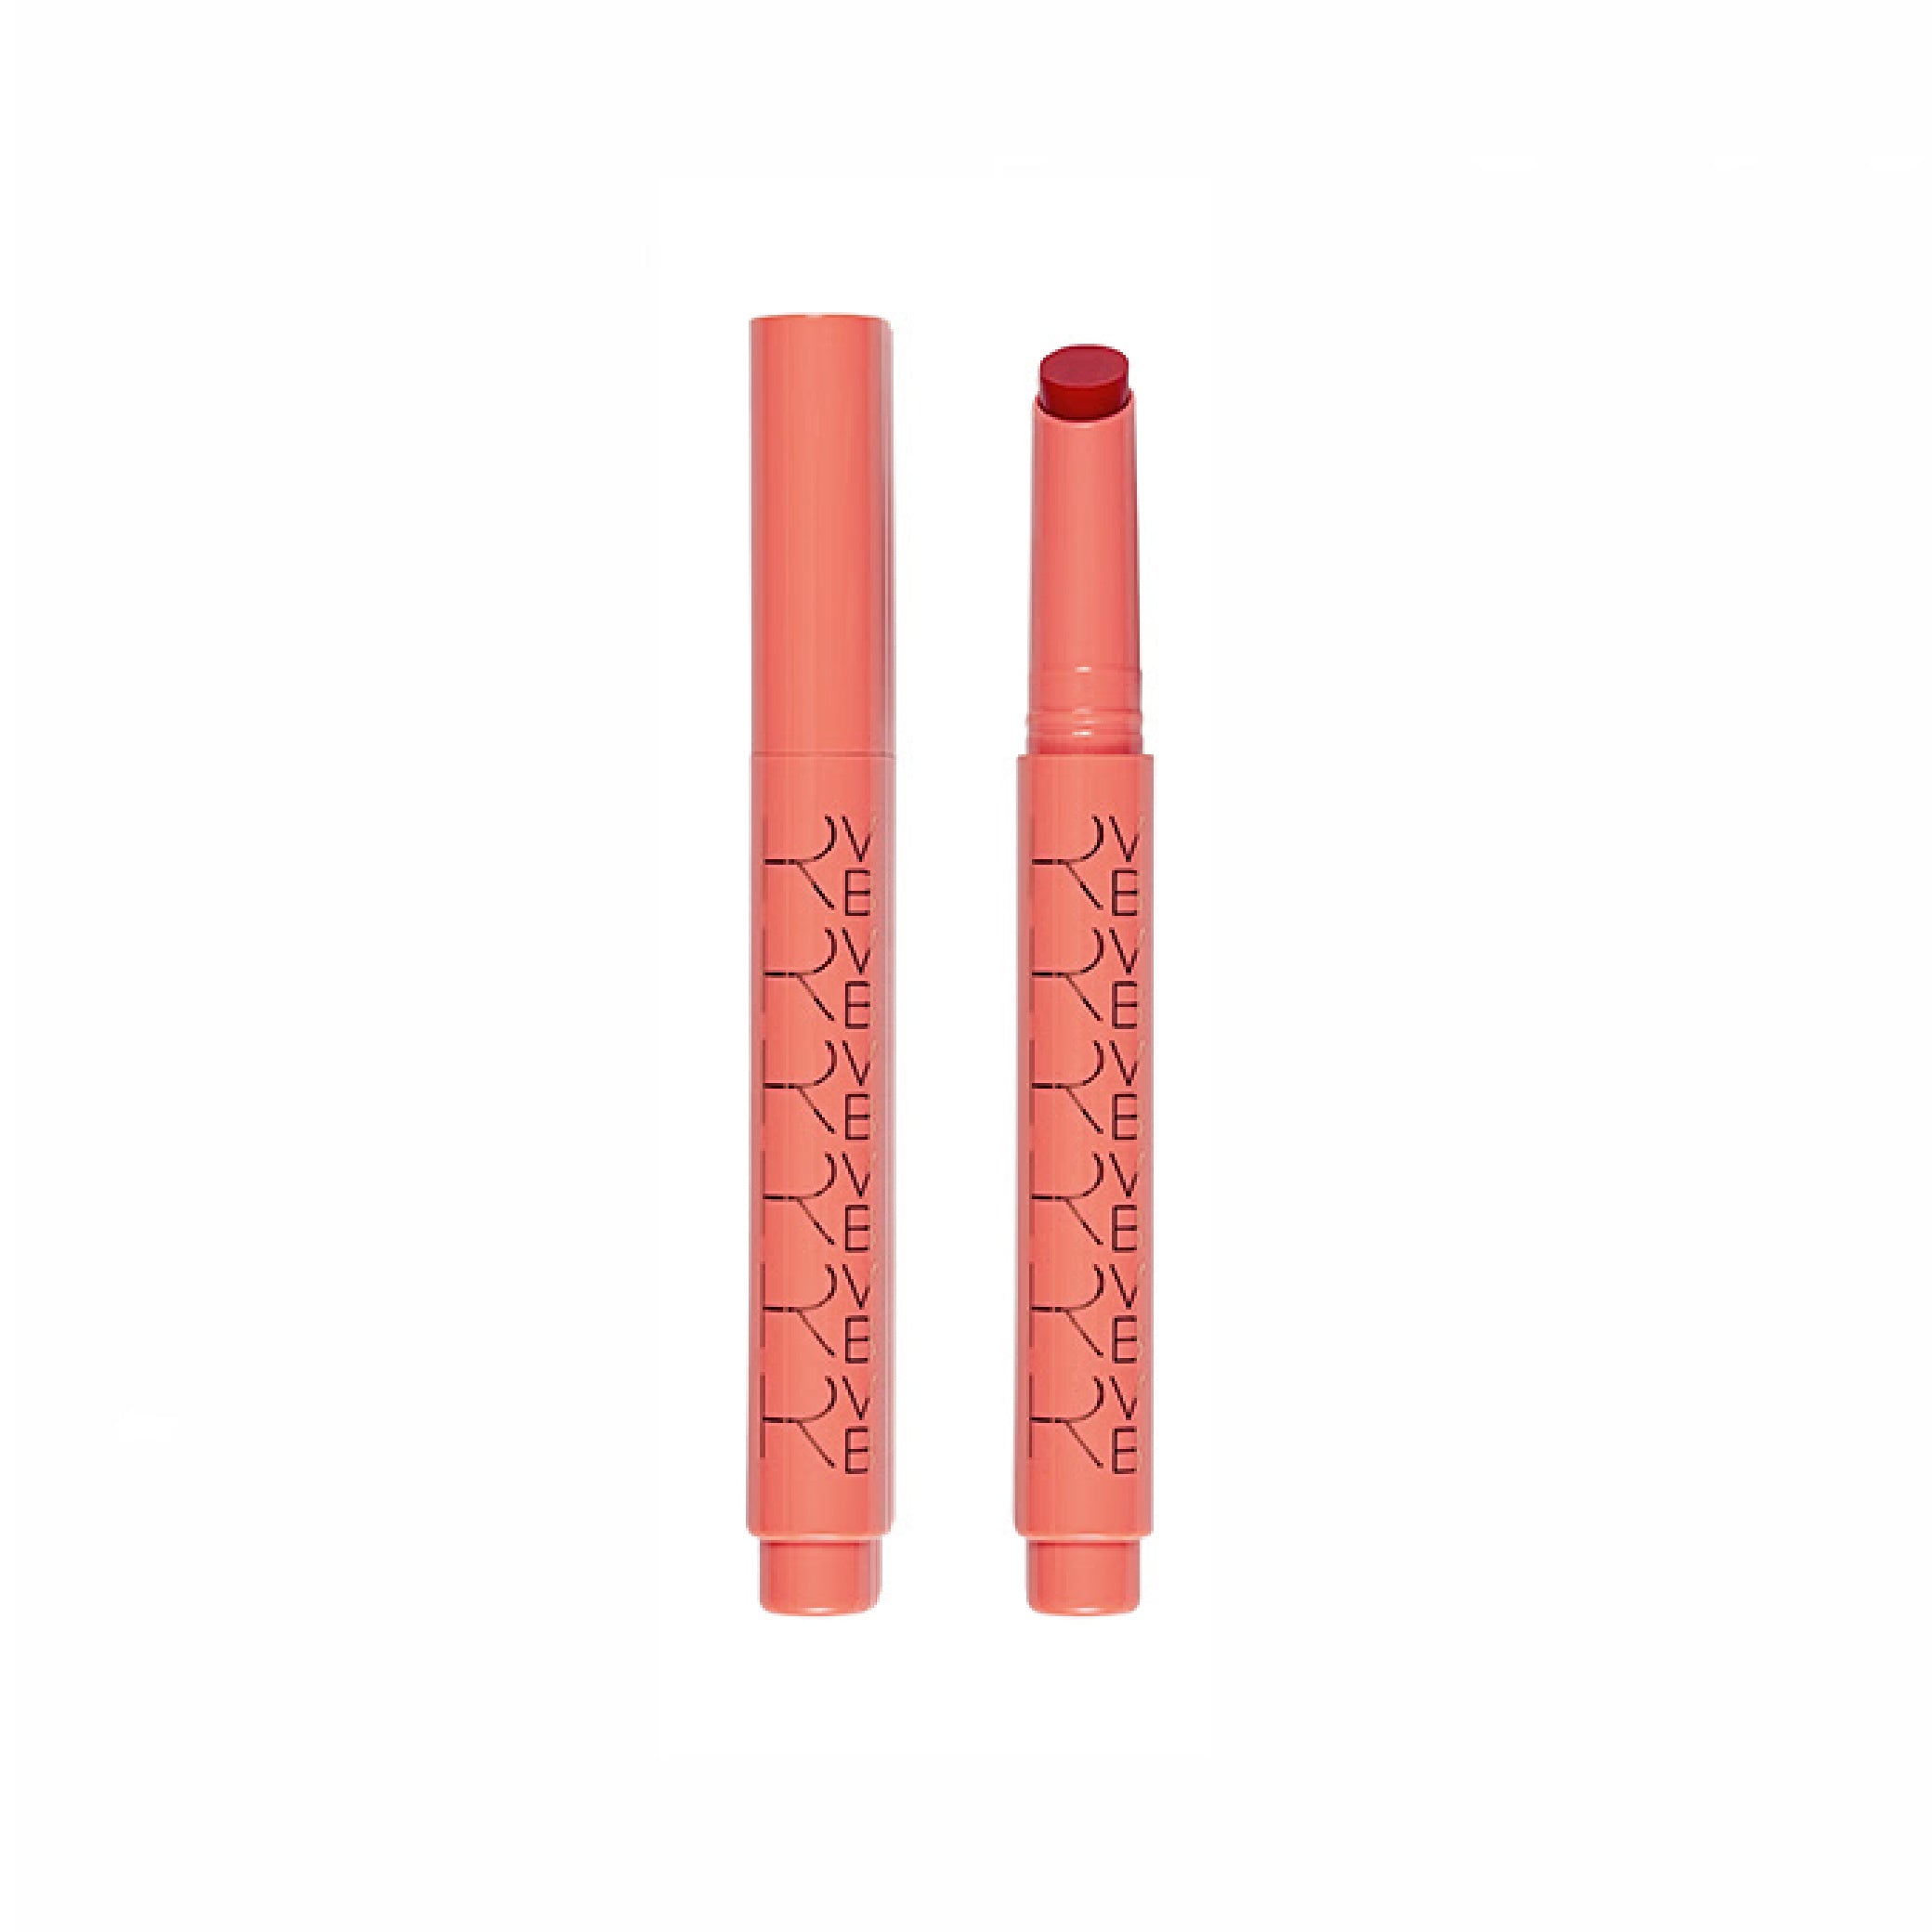 RVB Lab the Makeup Gloss RED, 22, Pink Avenue Skin Care, Торонто, Канада